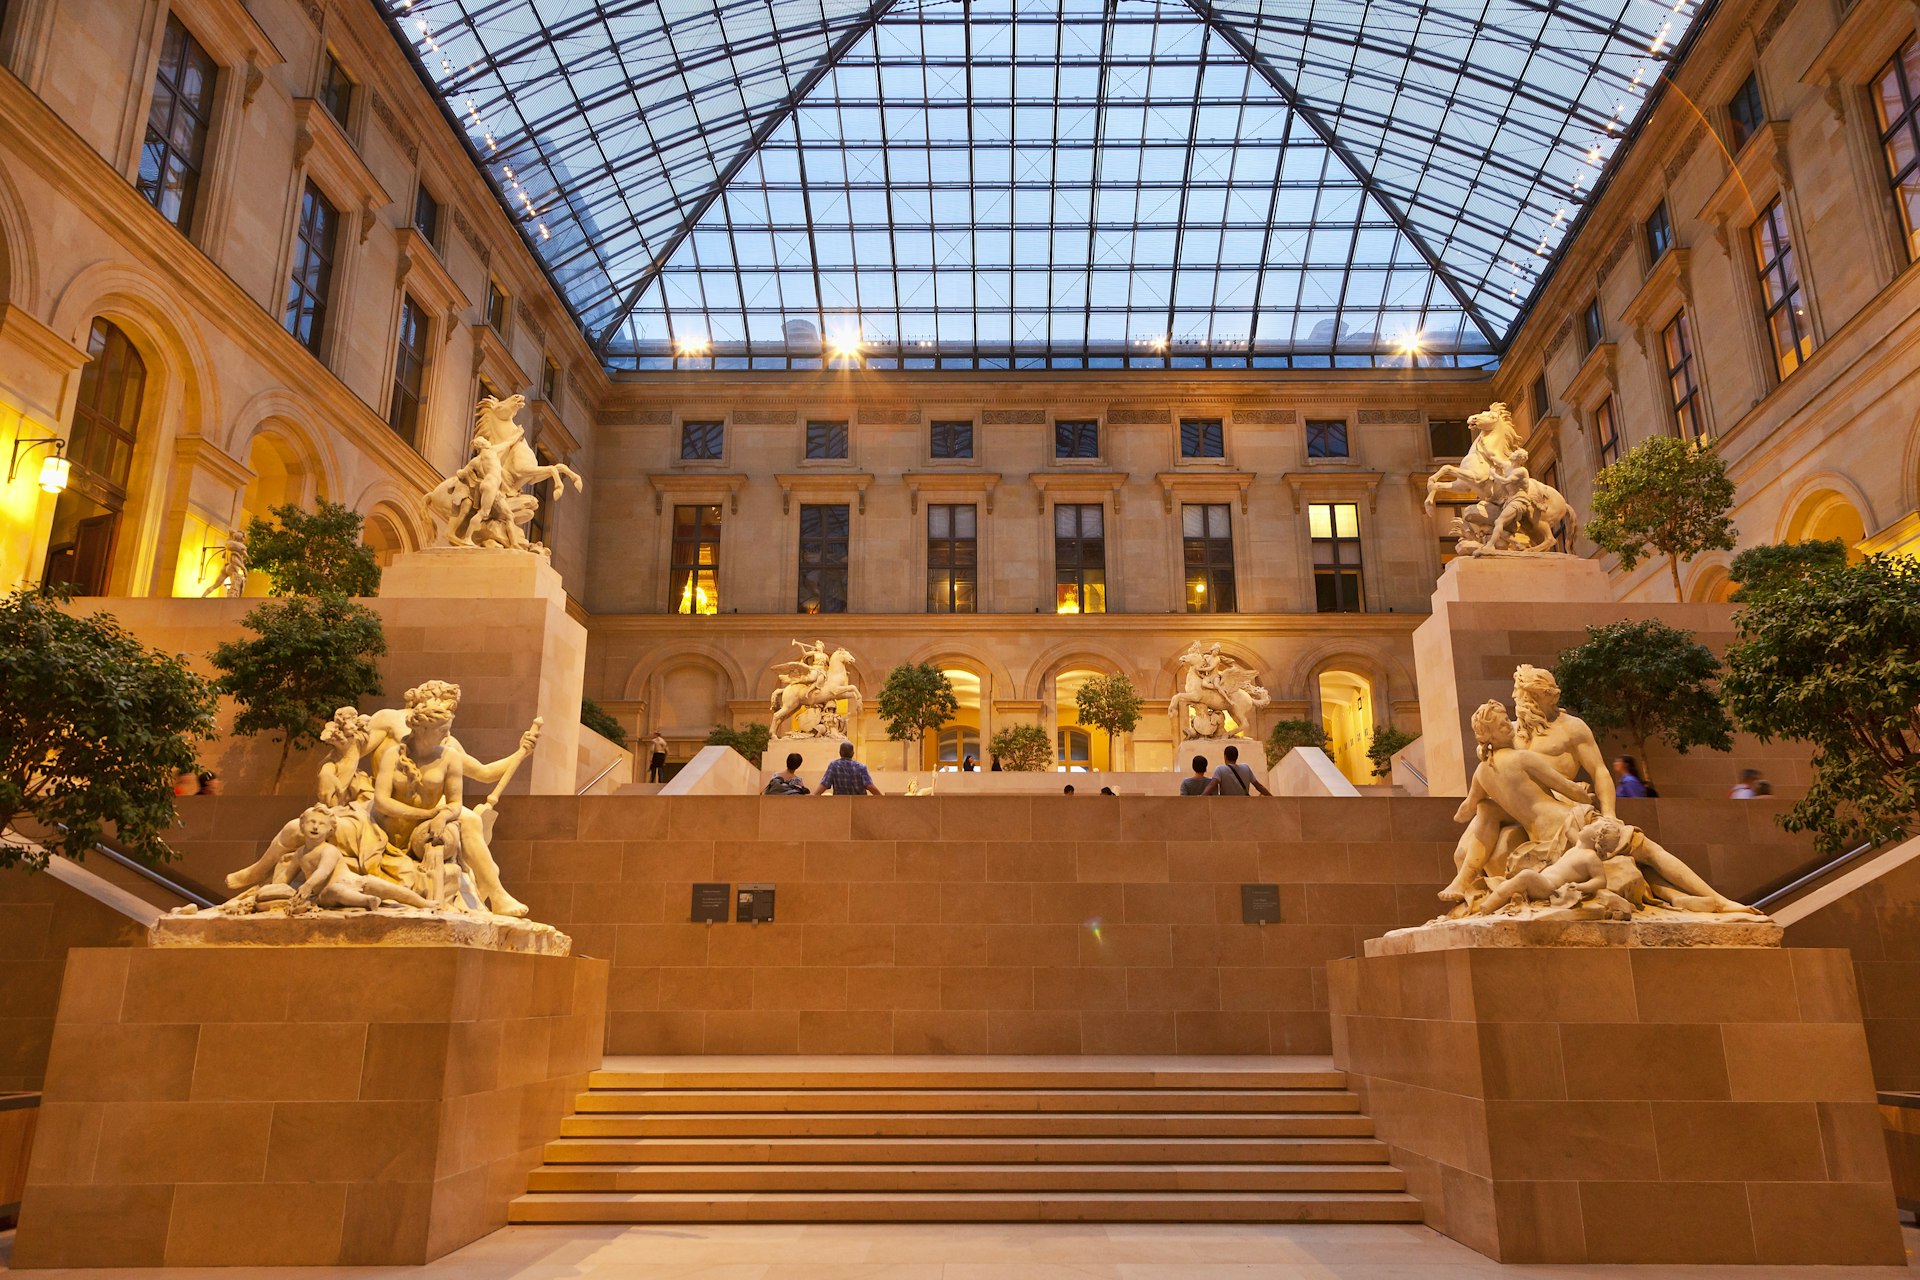 People are admiring the sculptures in the Cour Marly, a vast atrium with a huge glass ceiling inside the Louvre in Paris.